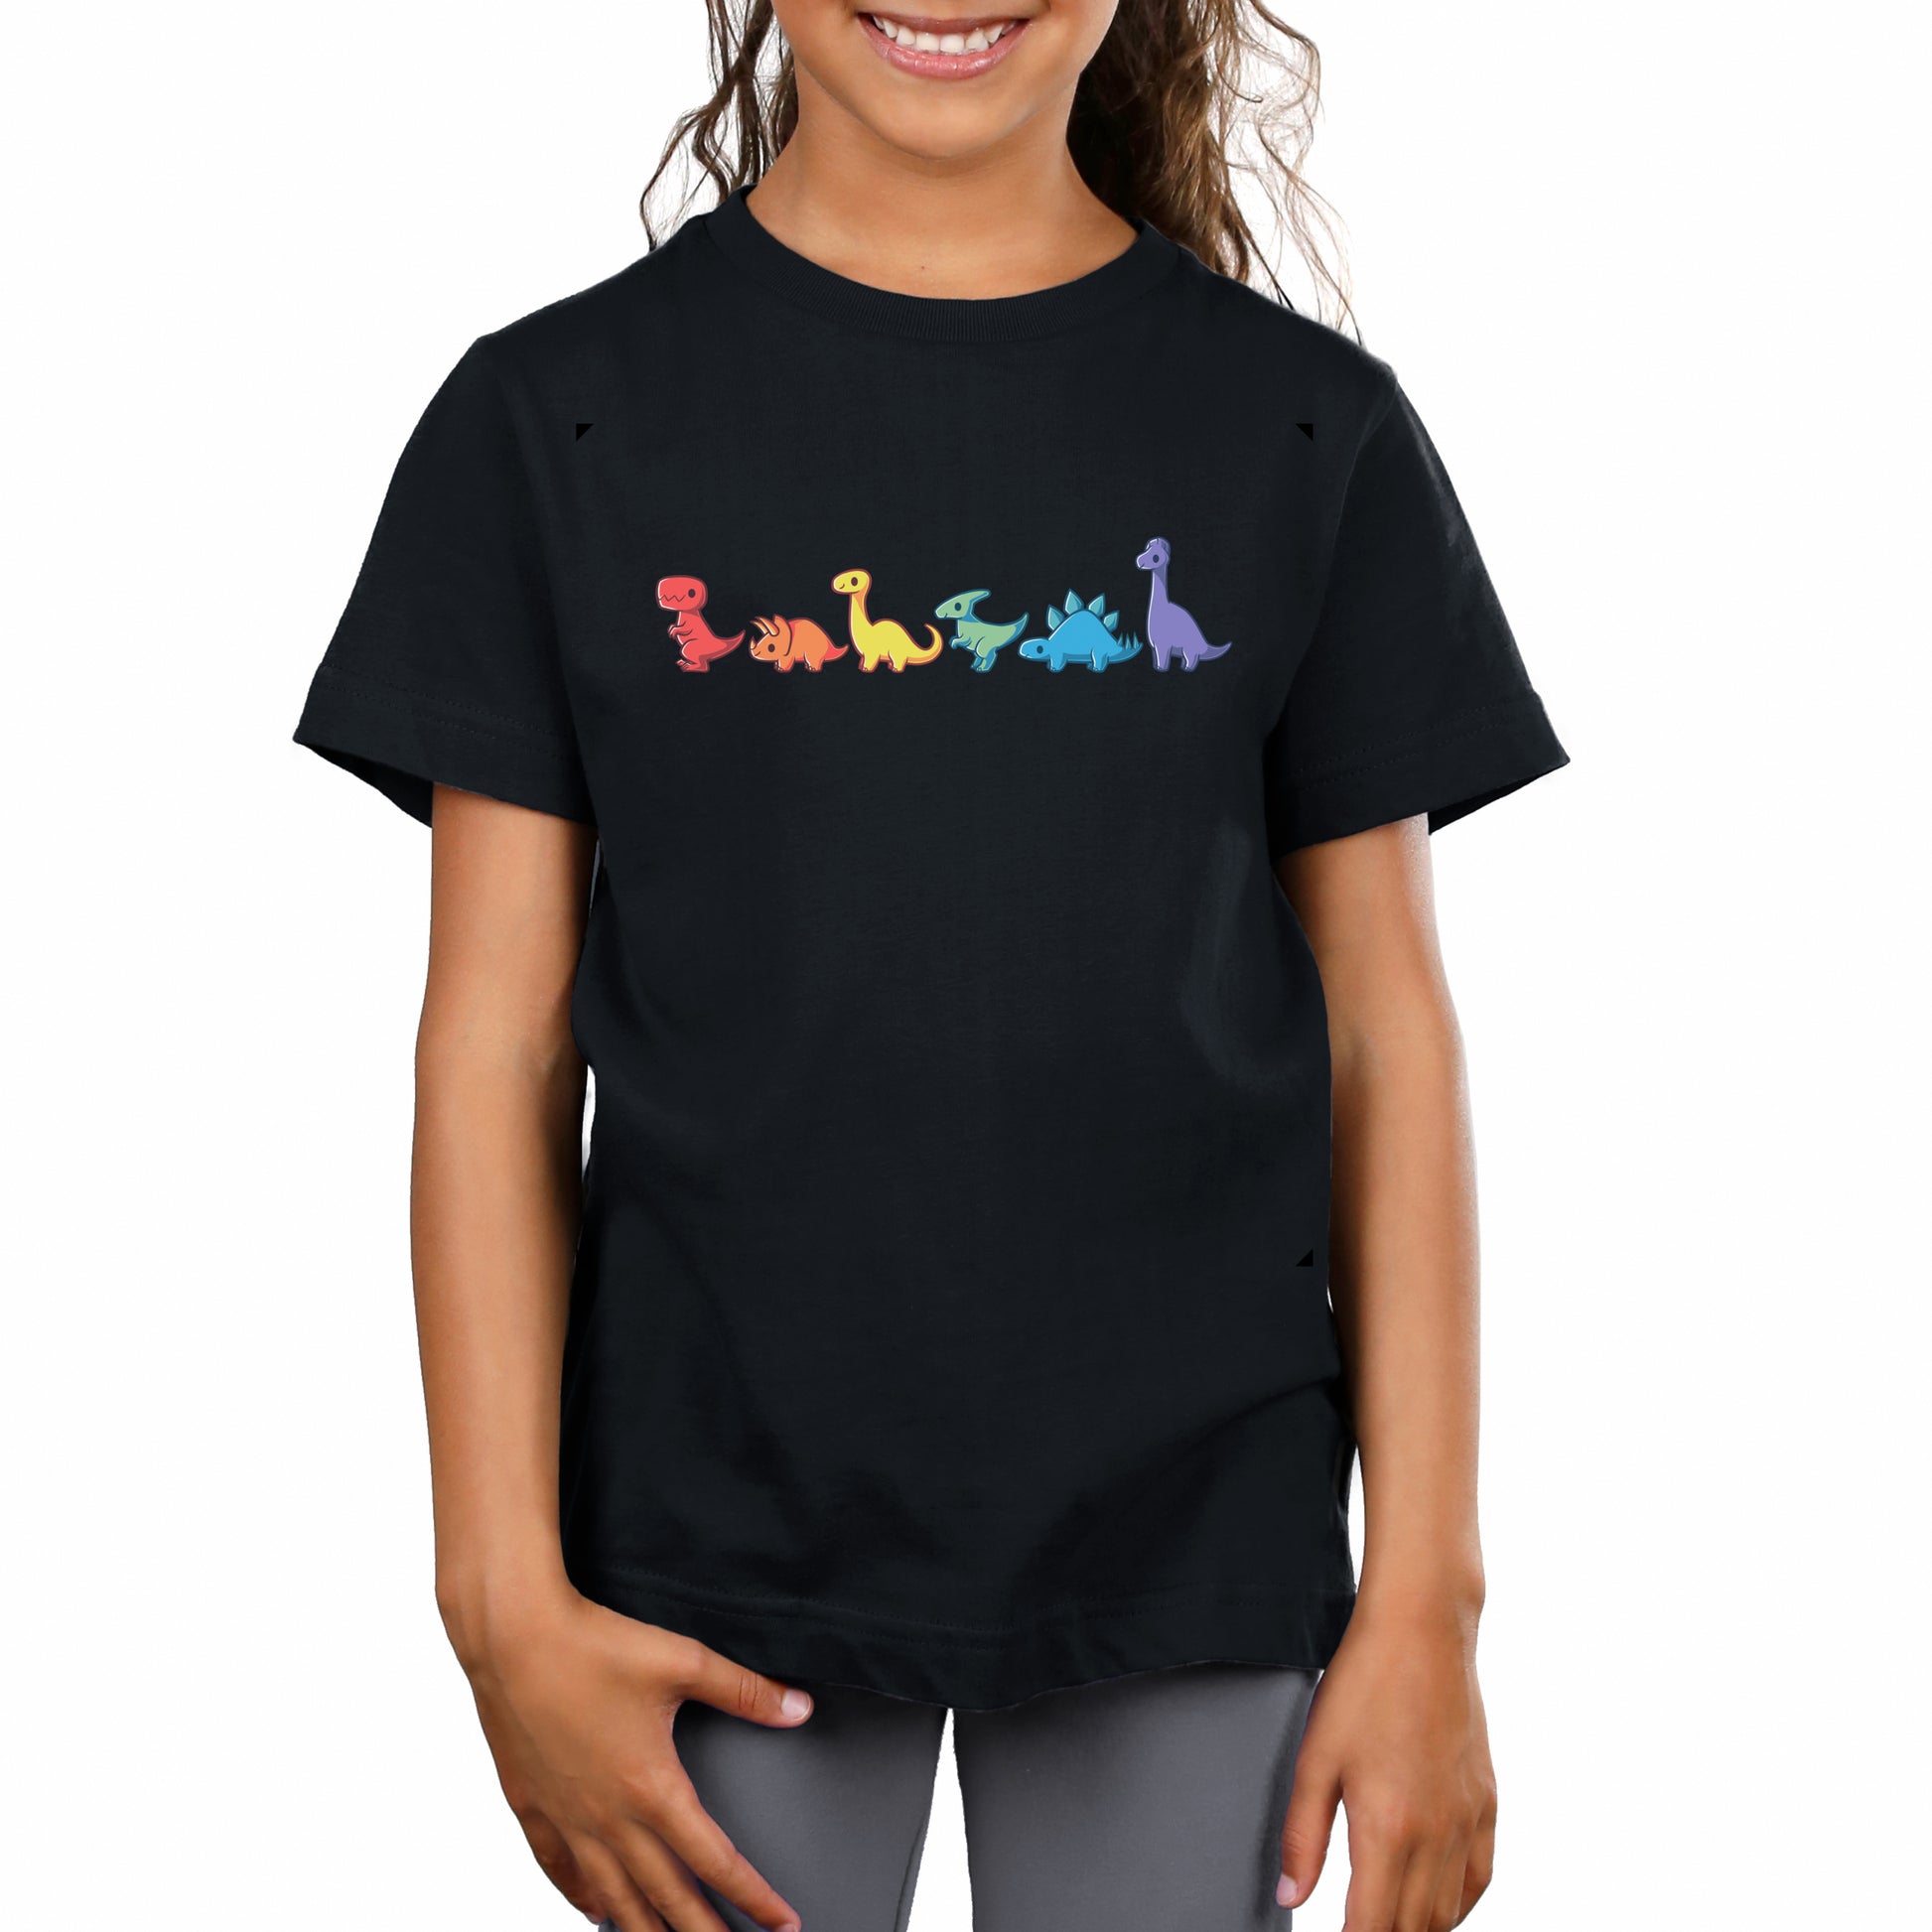 A child wears a black 100% super soft ringspun cotton Rainbow Dinos T-shirt by monsterdigital with small, colorful dinosaur graphics in a horizontal line across the chest.